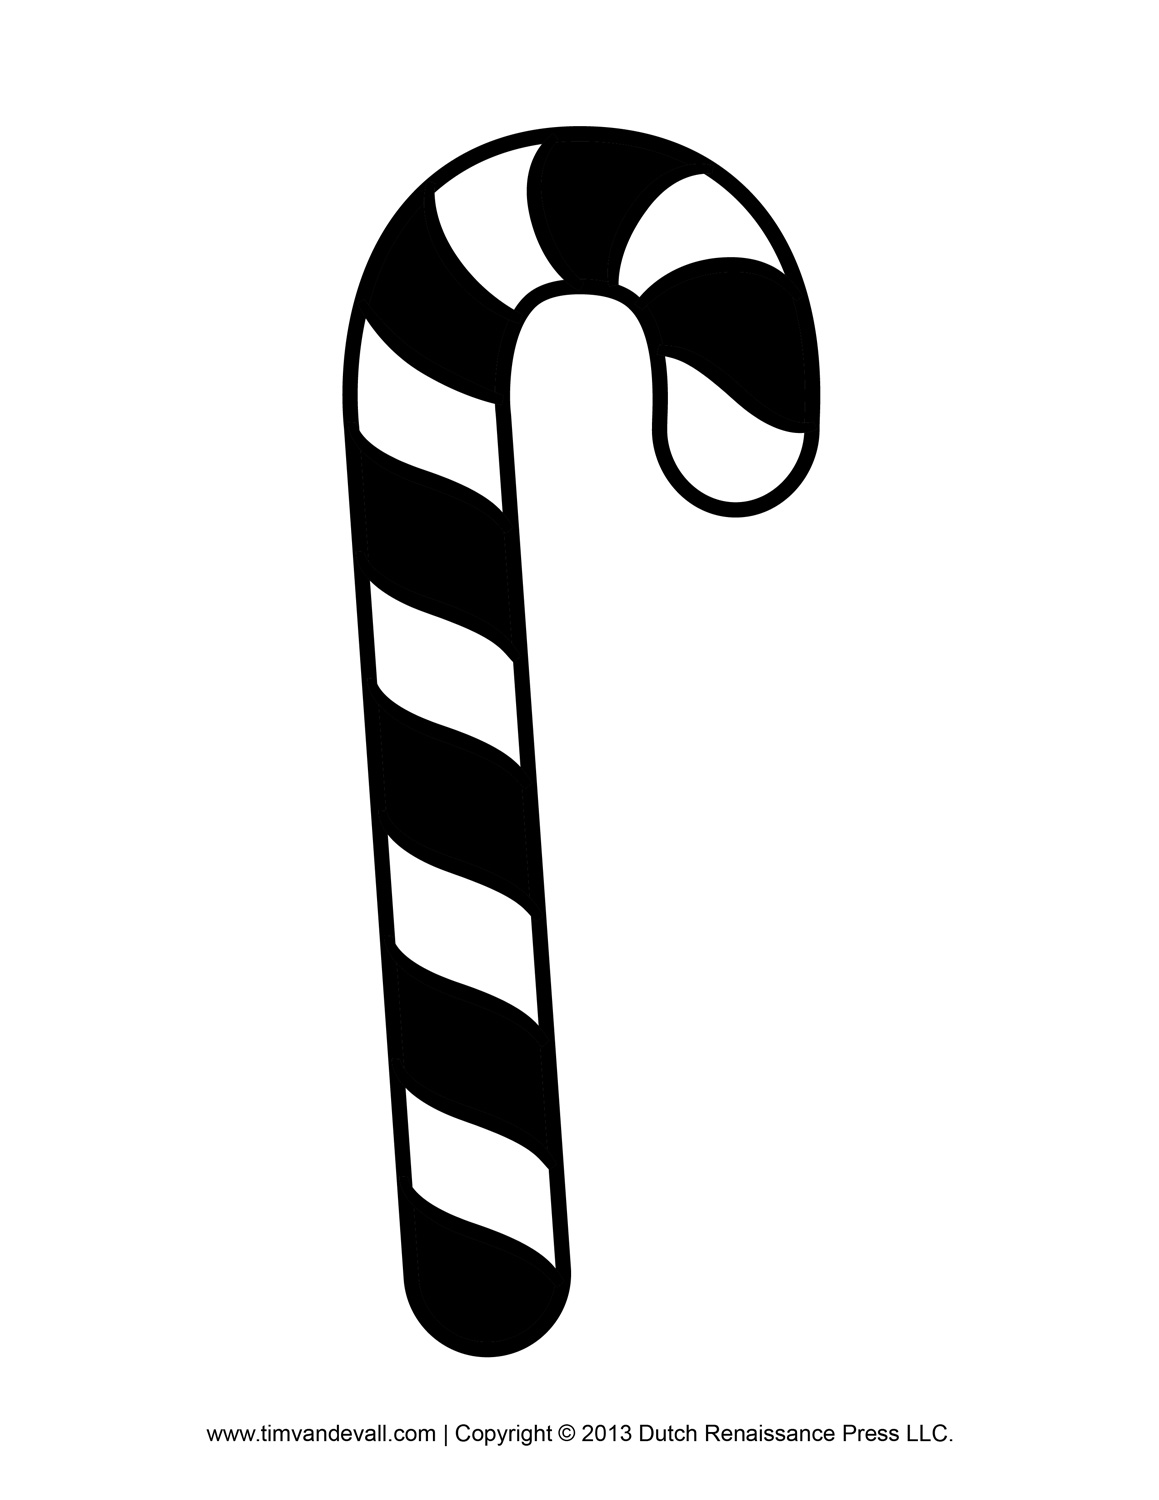 Free Candy Cane Template Printables, Crafts, Clipart & Decorations